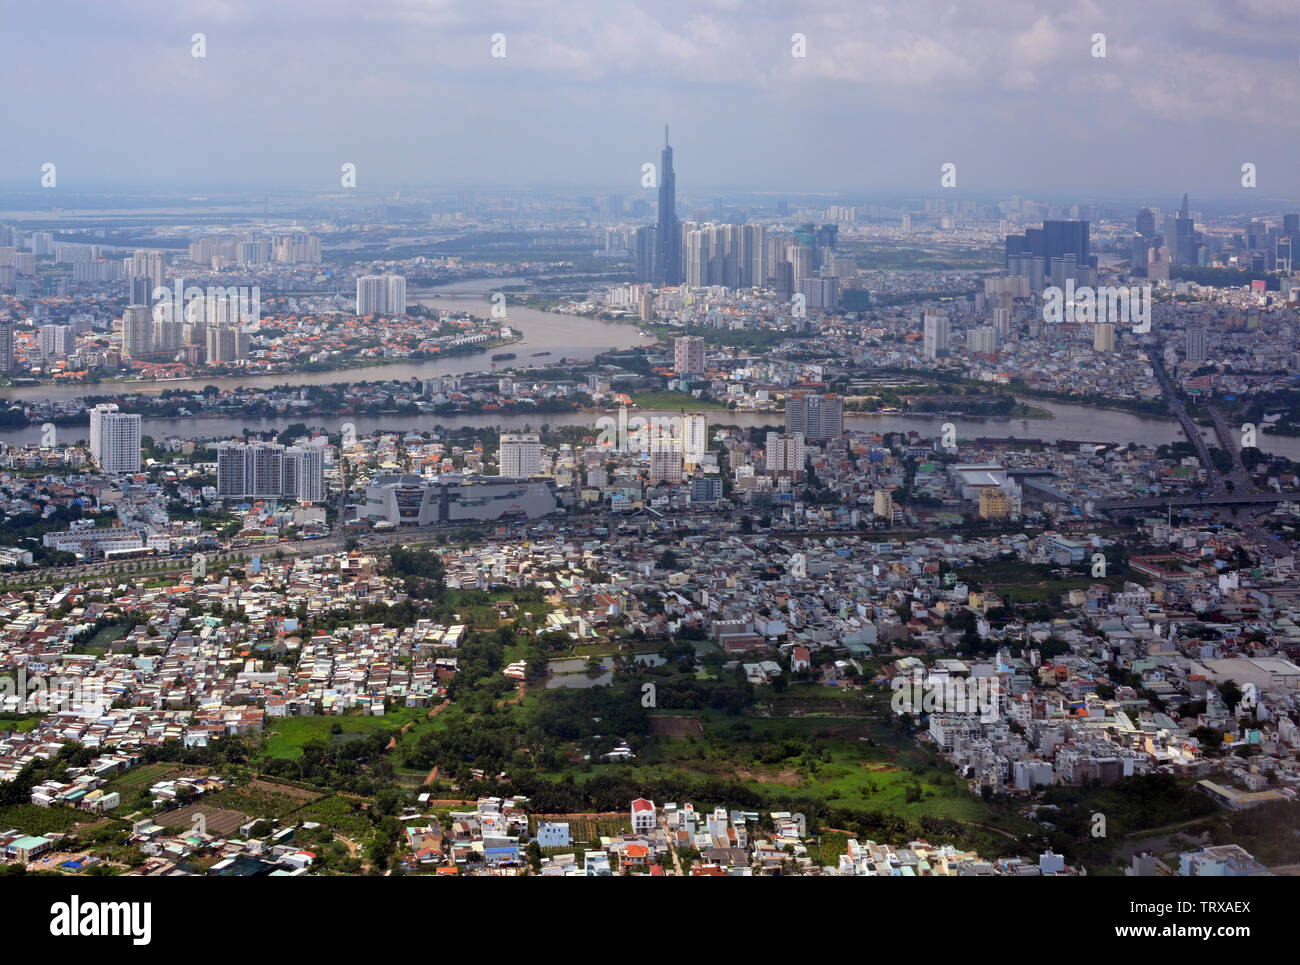 Arriving into Ho Chi Minh City, Vietnam - an aerial cityscape panorama featuring the Saigon River and tower. Stock Photo